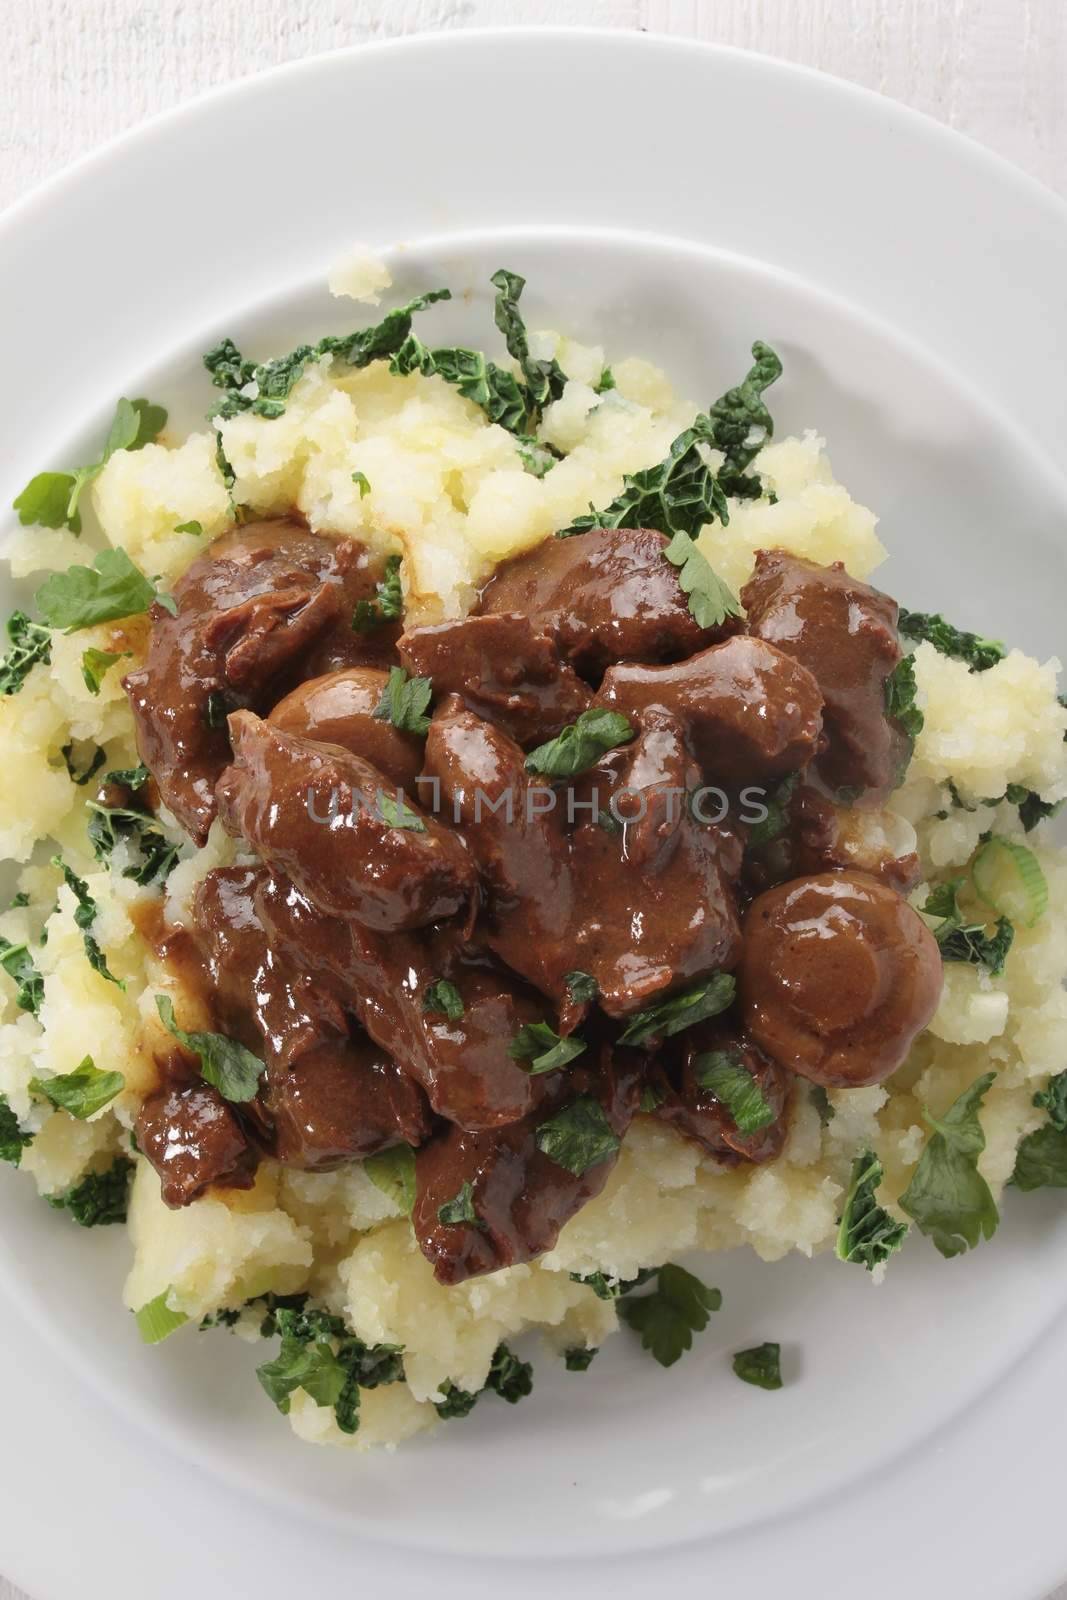 beef stew colcannon by neil_langan